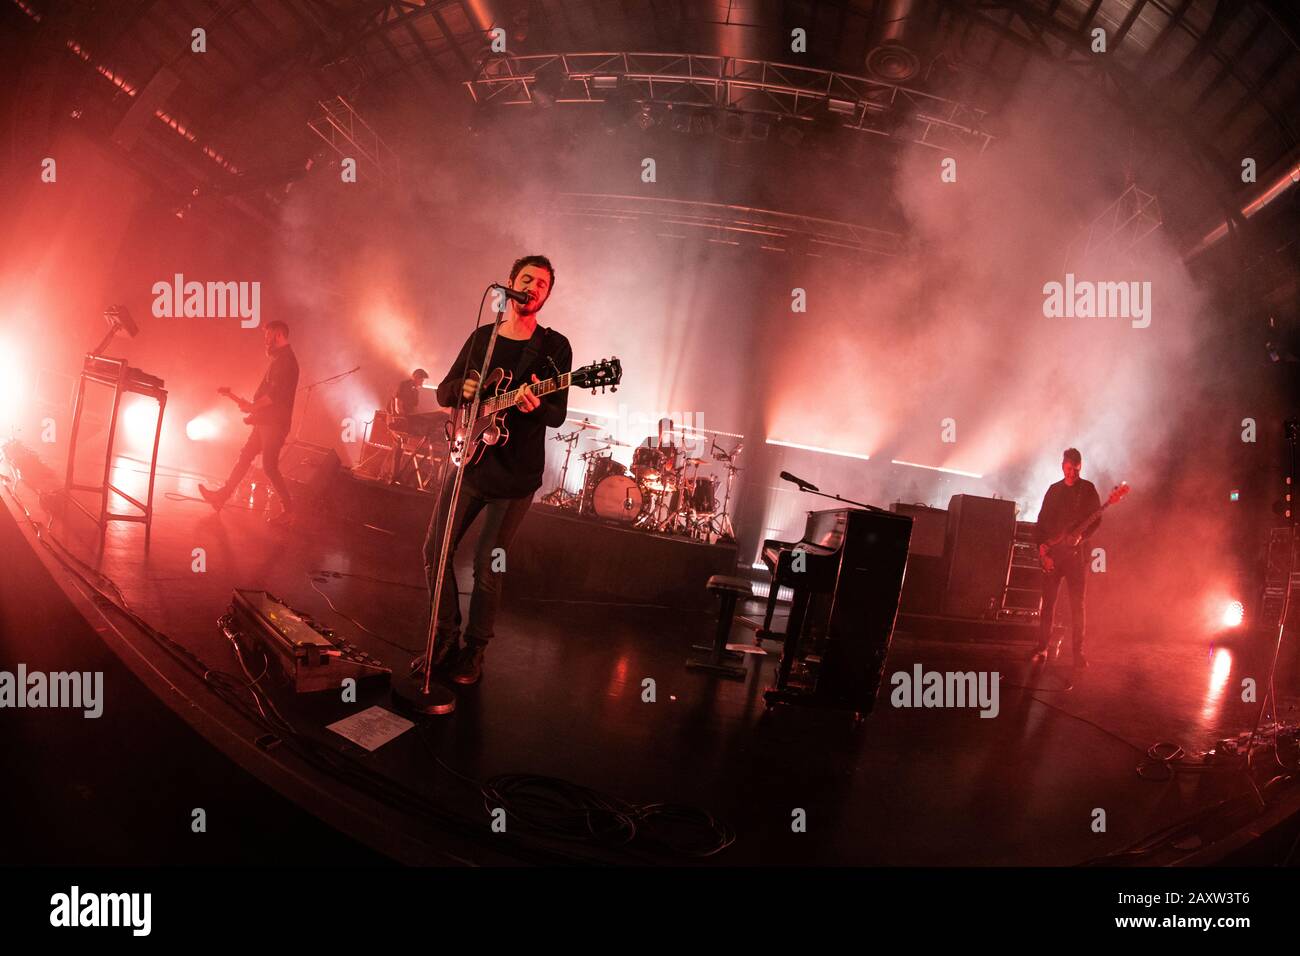 Milan Italy. 12 February 2020. The British rock band EDITORS performs live  on stage at Alcatraz during "The Black Gold Tour Stock Photo - Alamy